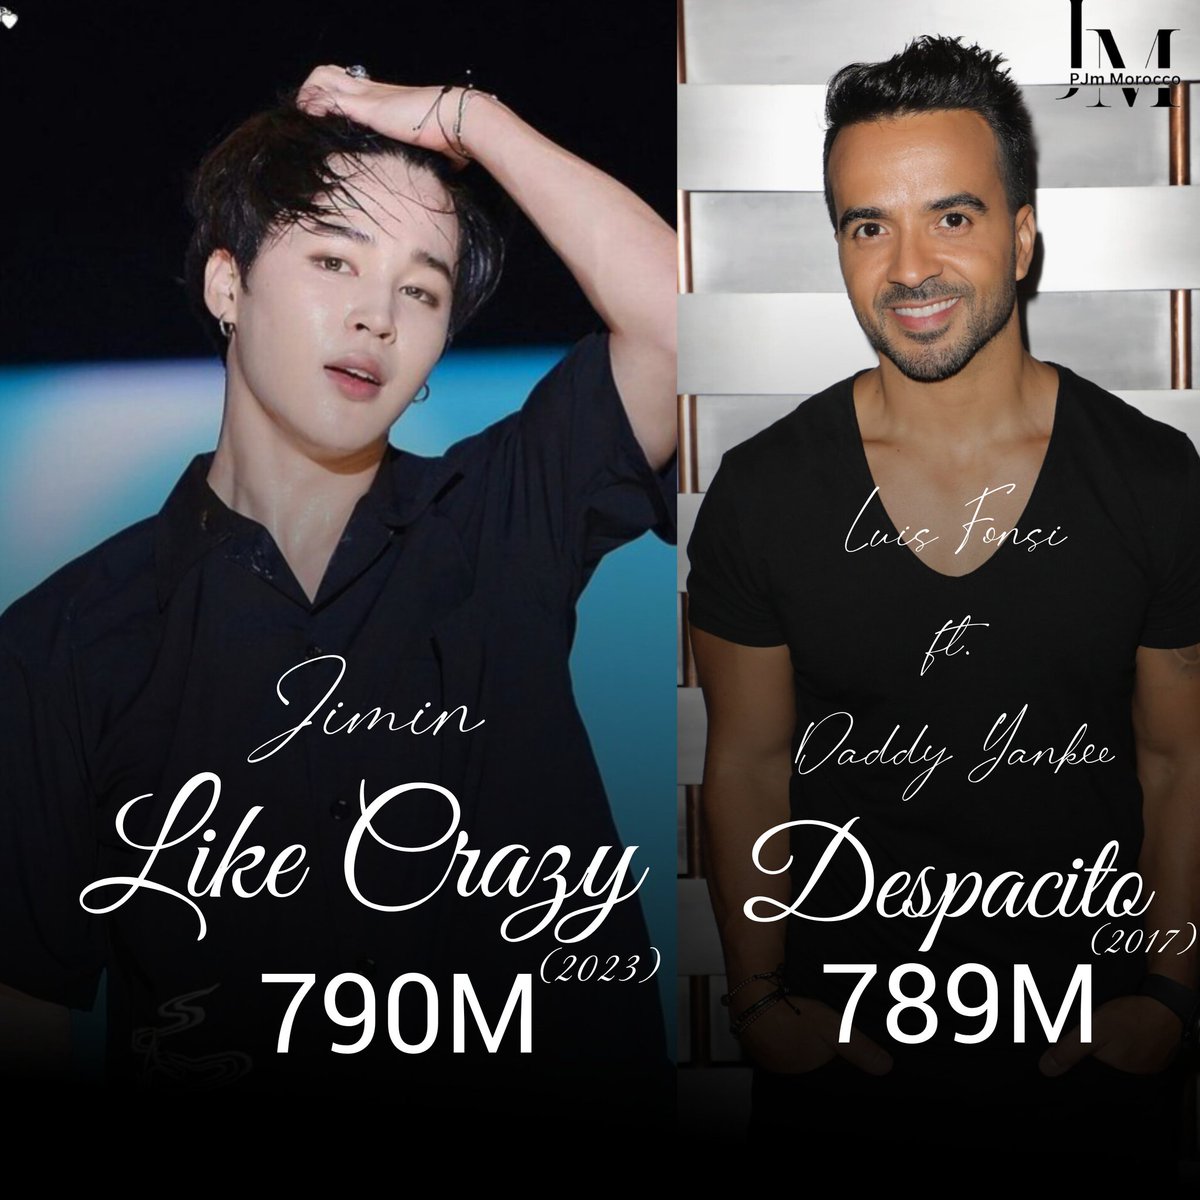 “Like Crazy” by JIMIN  has reached over 790M filtered streams on Spotify chart, surpassing 'Despacito' by Puerto Rican singer Louis Fonsi ft. Daddy Yankee.